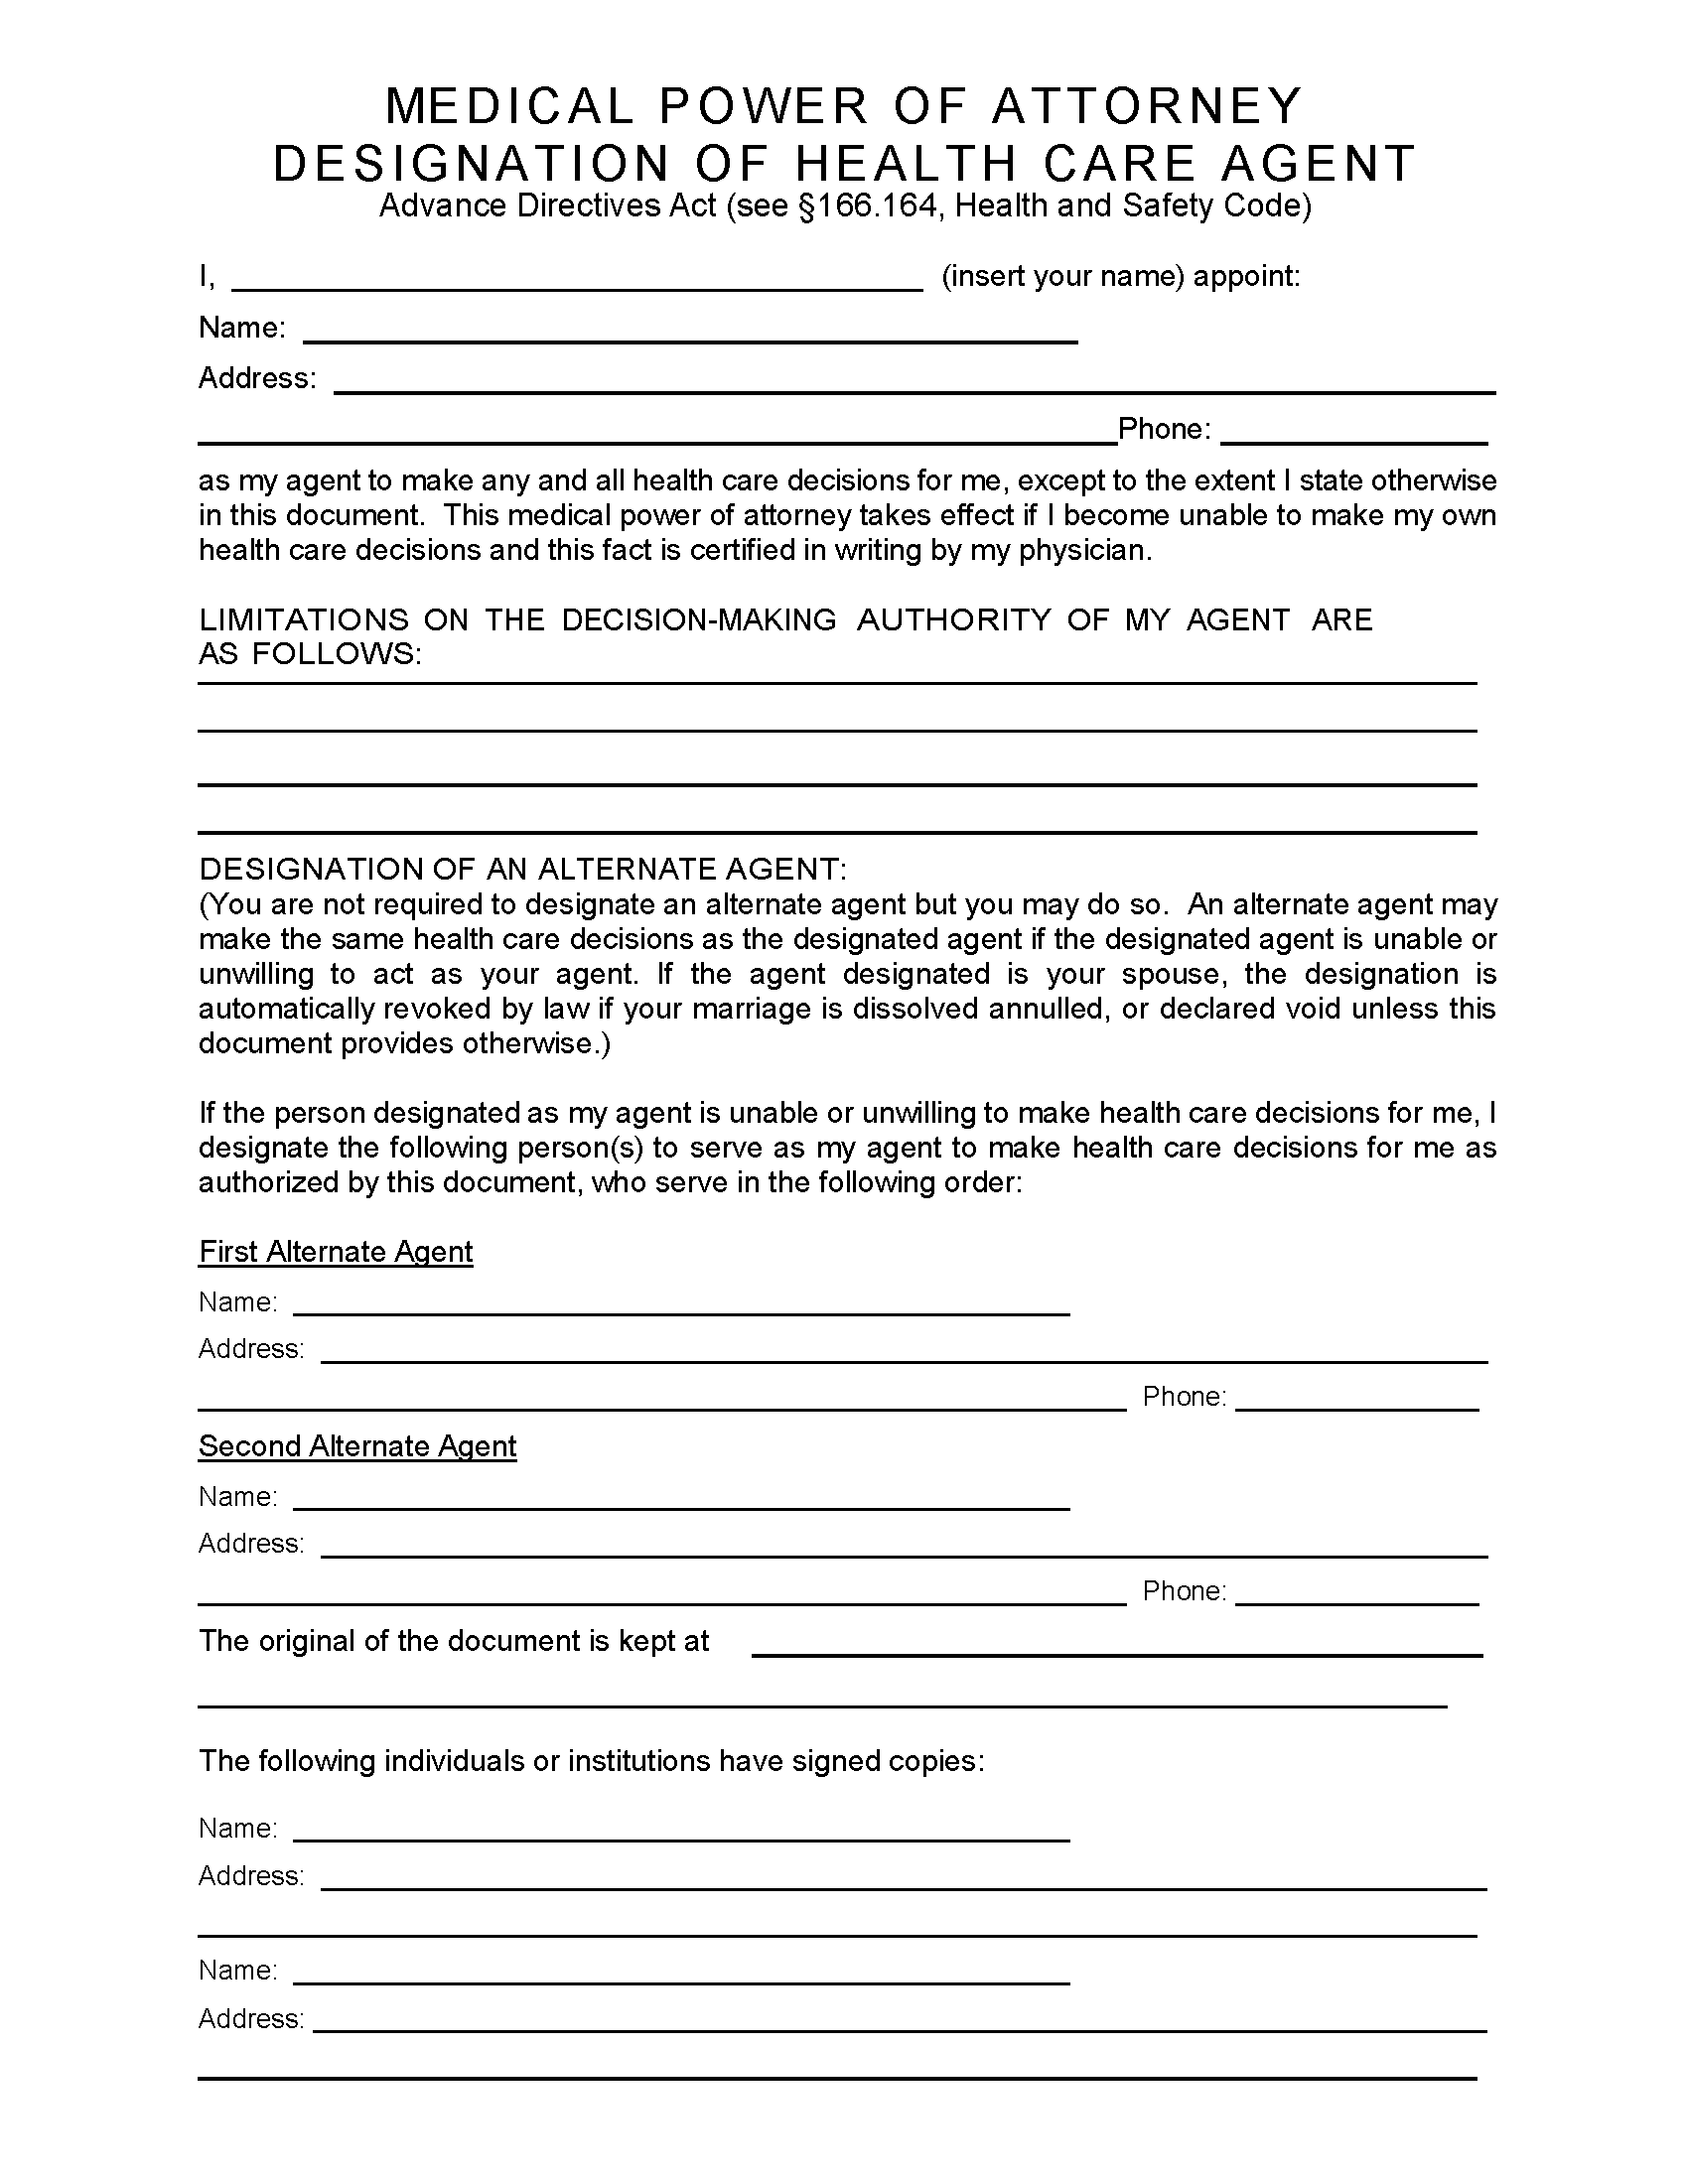 texas-medical-power-of-attorney-pdf-free-printable-legal-forms